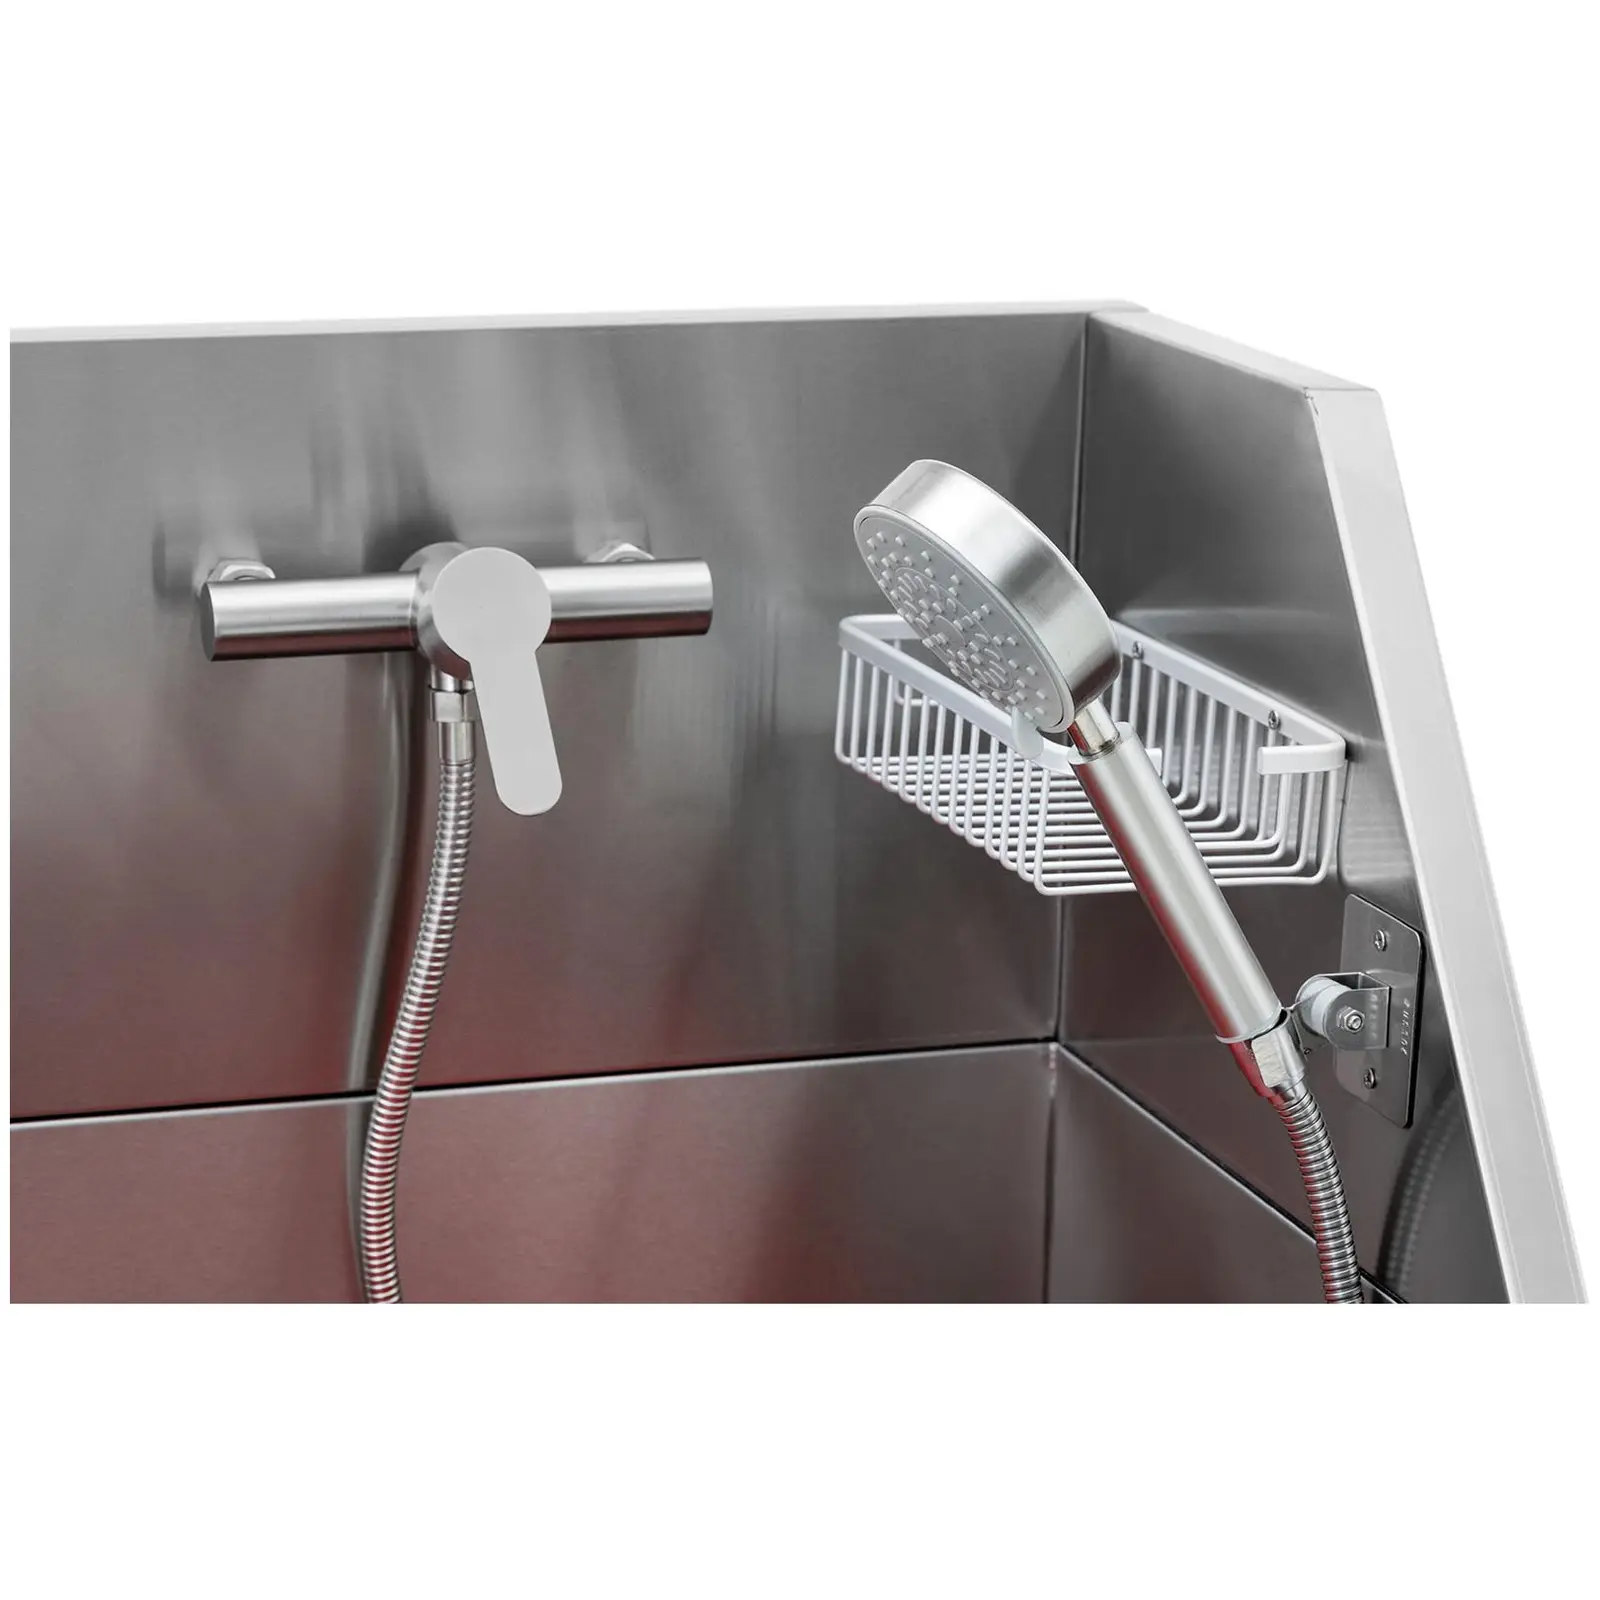 Dog bath - stainless steel - up to 60 kg - with steps